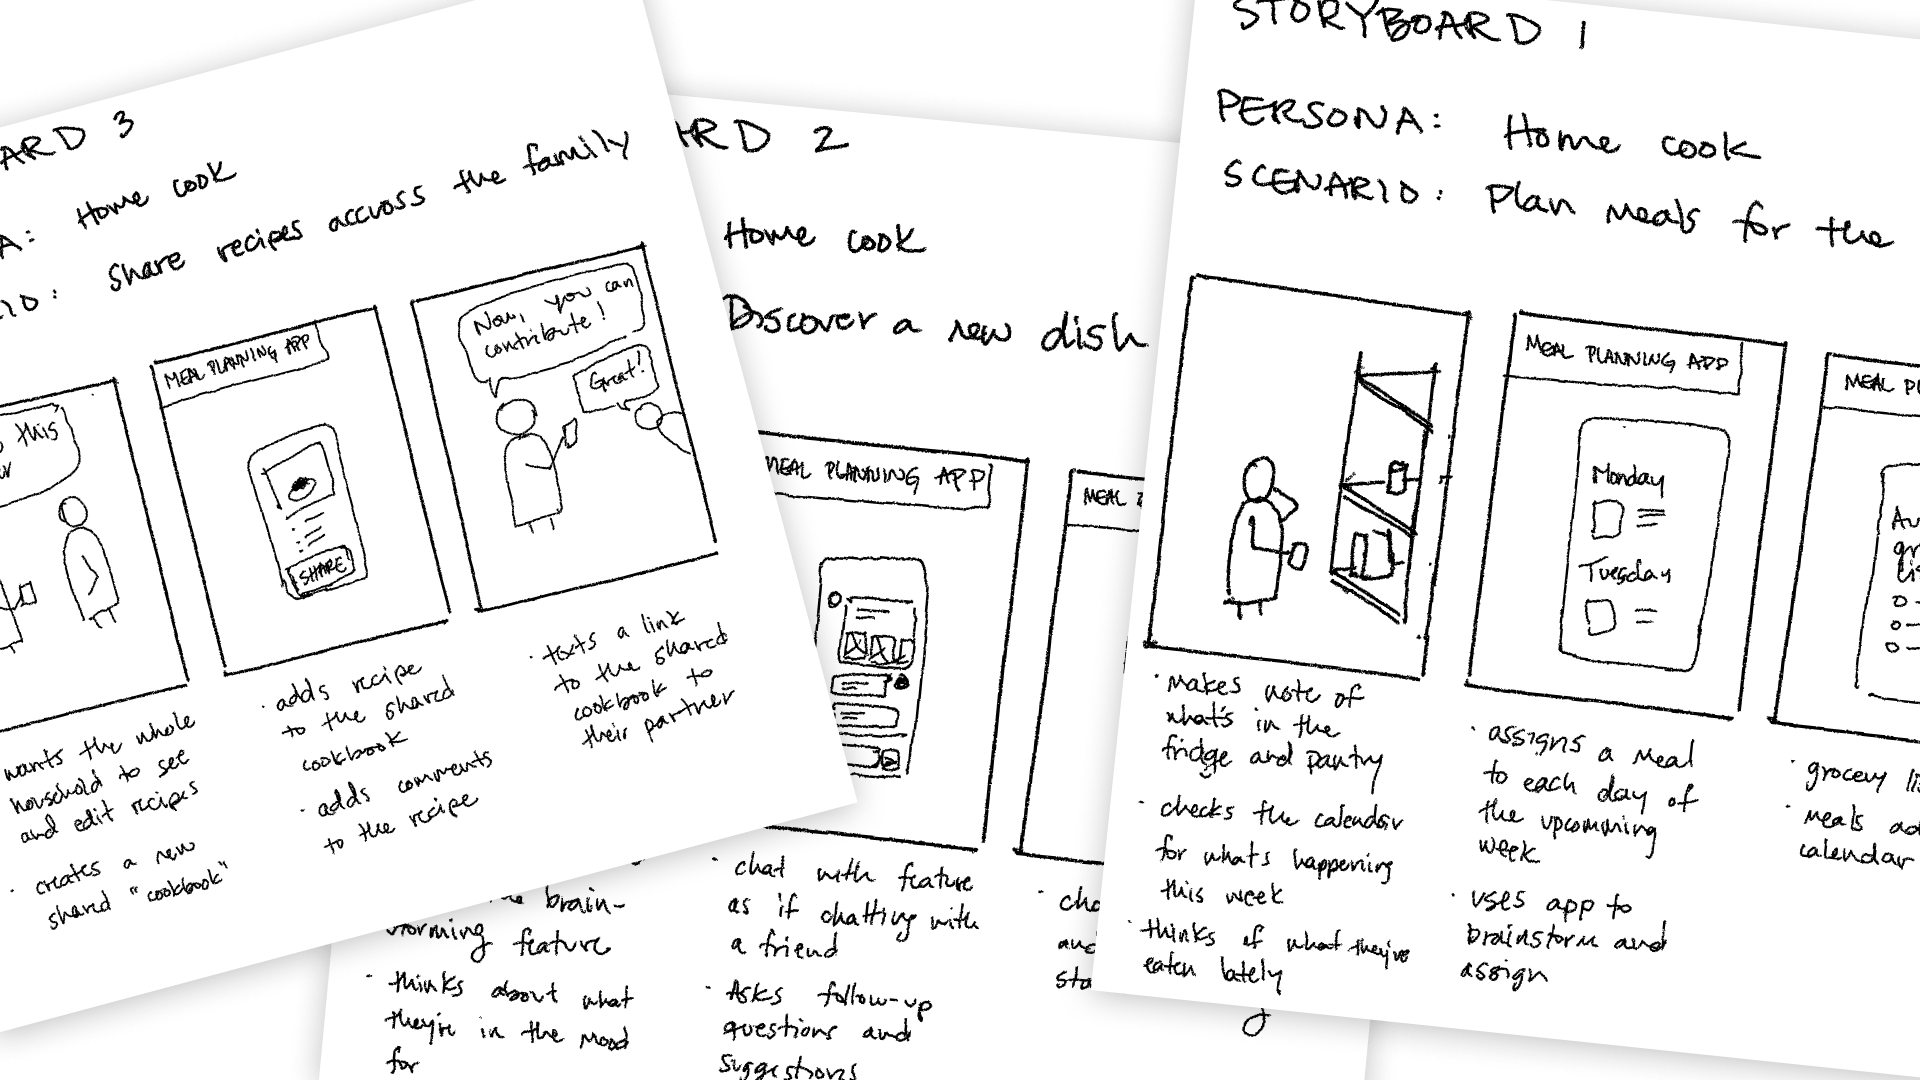 User story sketches